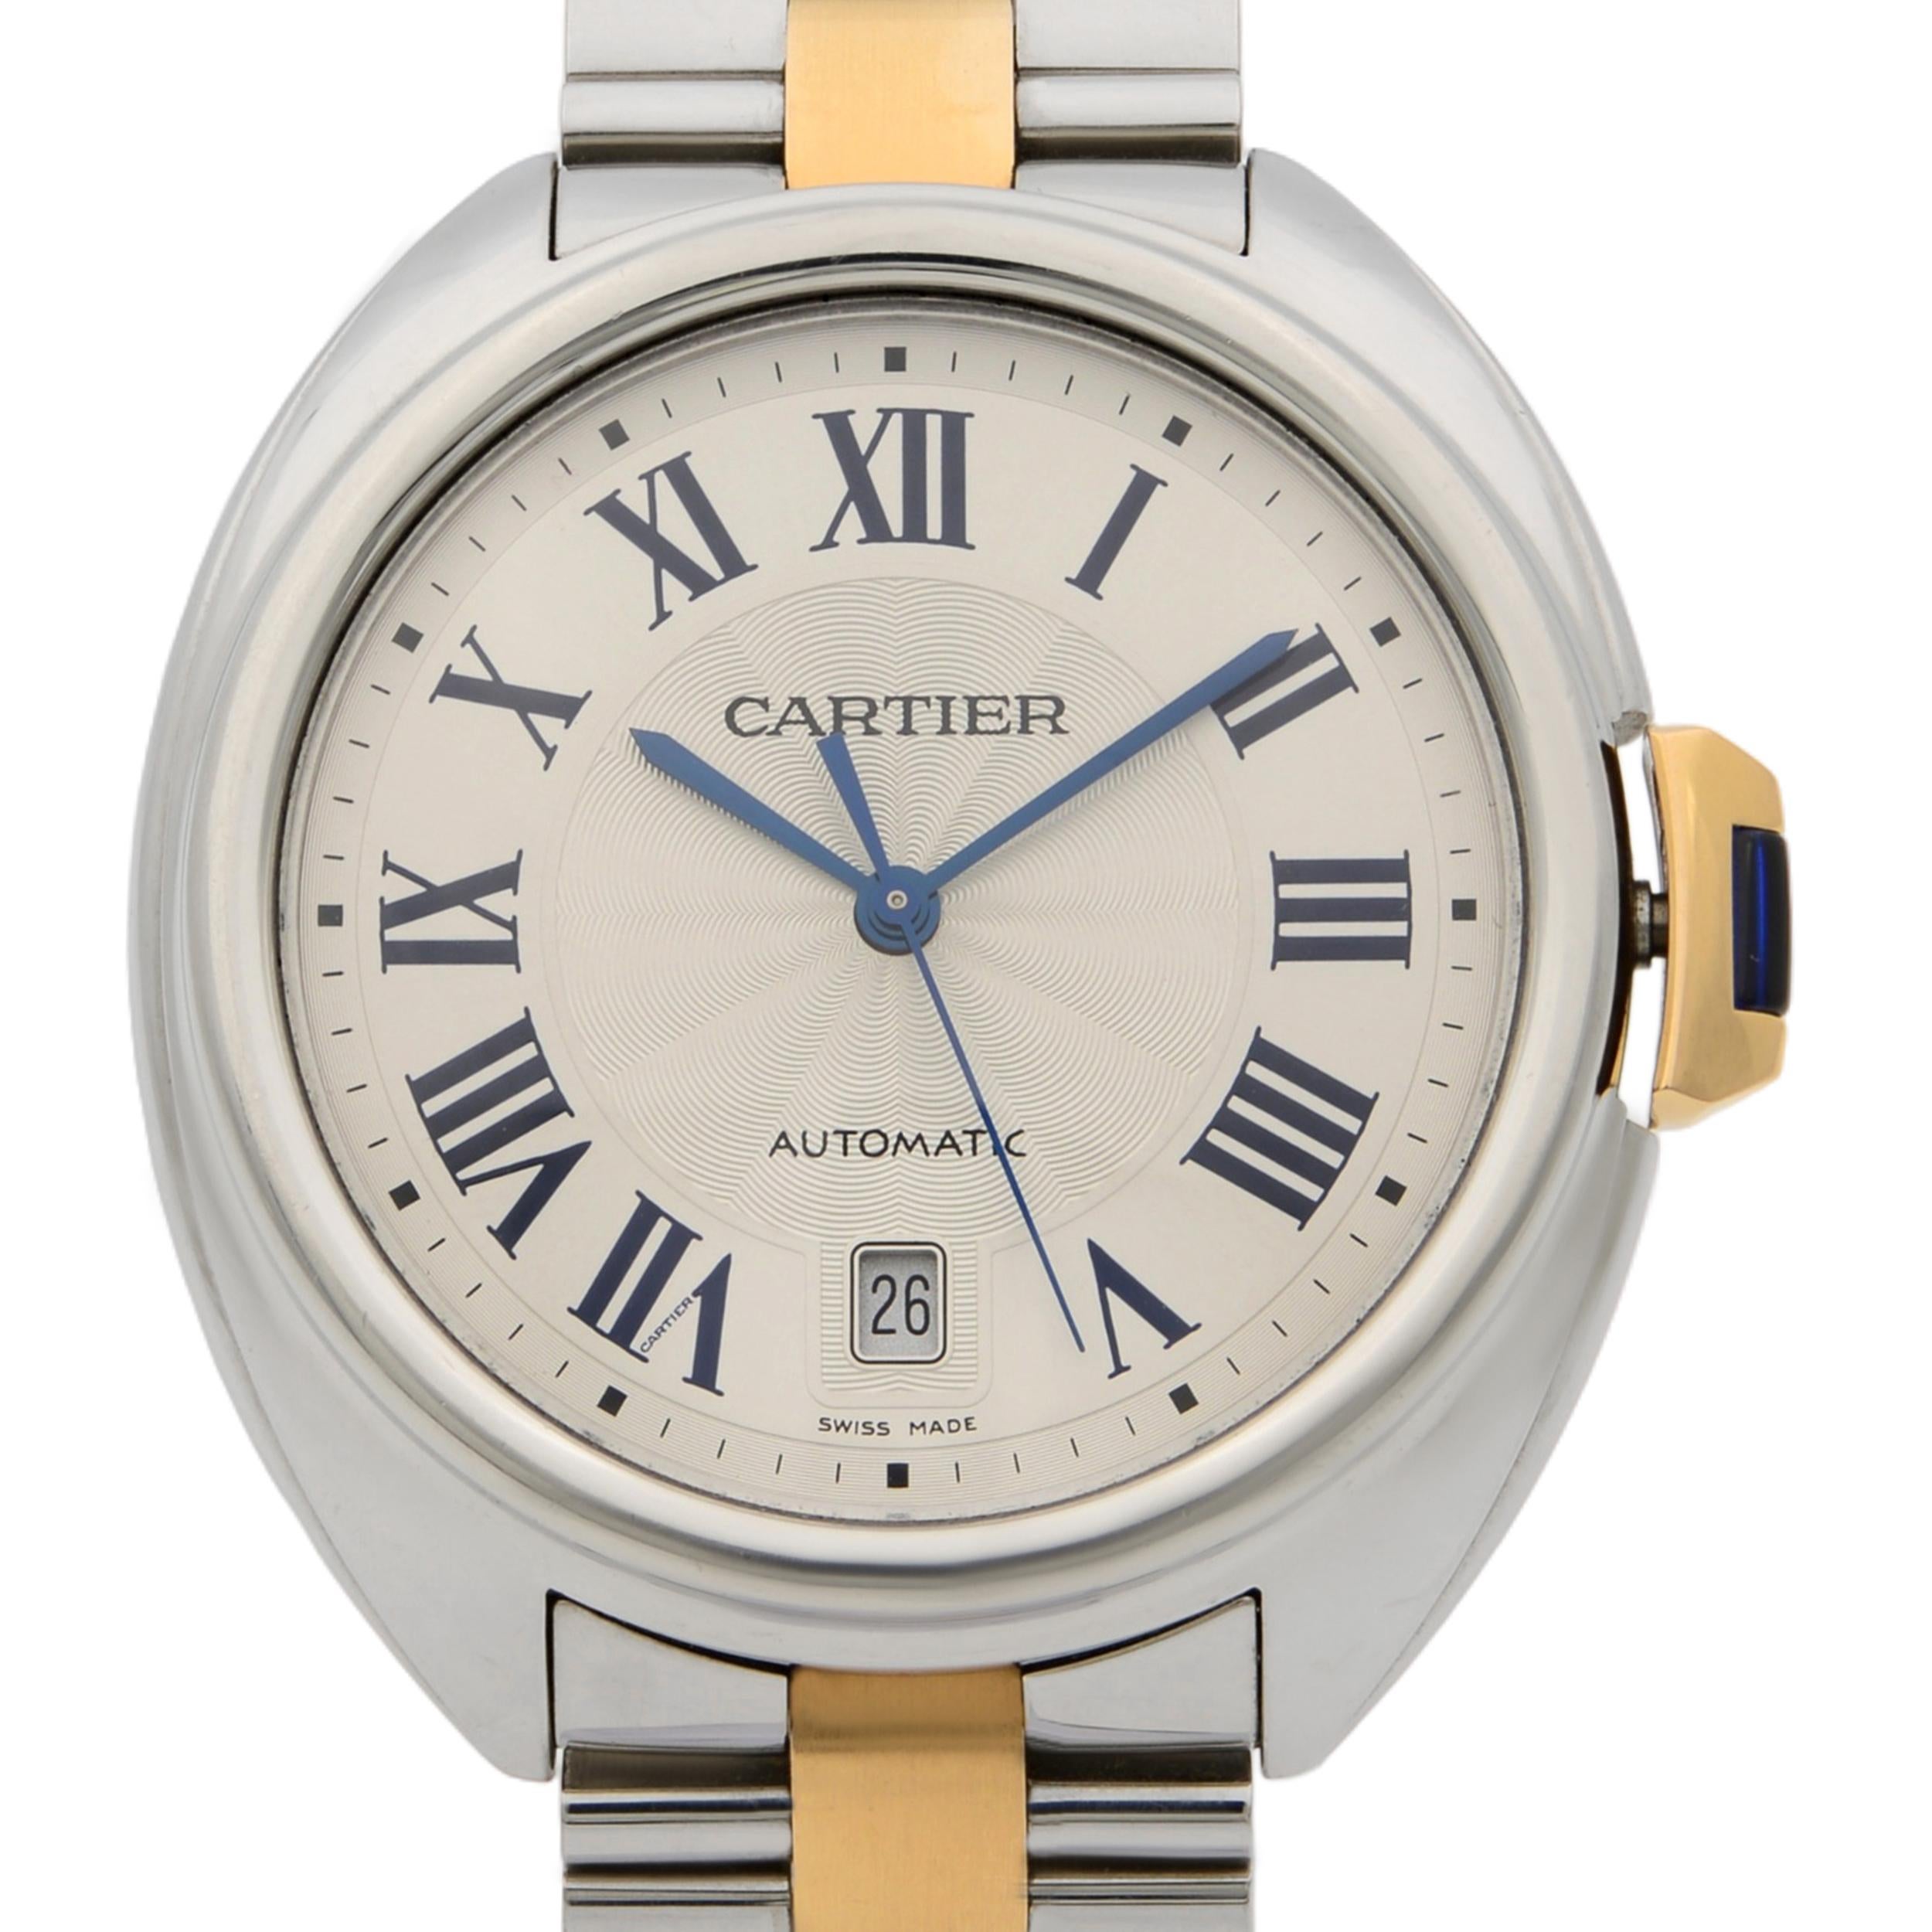 This pre-owned Cartier Cle De Cartier W2CL0002 is a beautiful men's timepiece that is powered by mechanical (automatic) movement which is cased in a stainless steel case. It has a round shape face, date indicator dial and has hand roman numerals